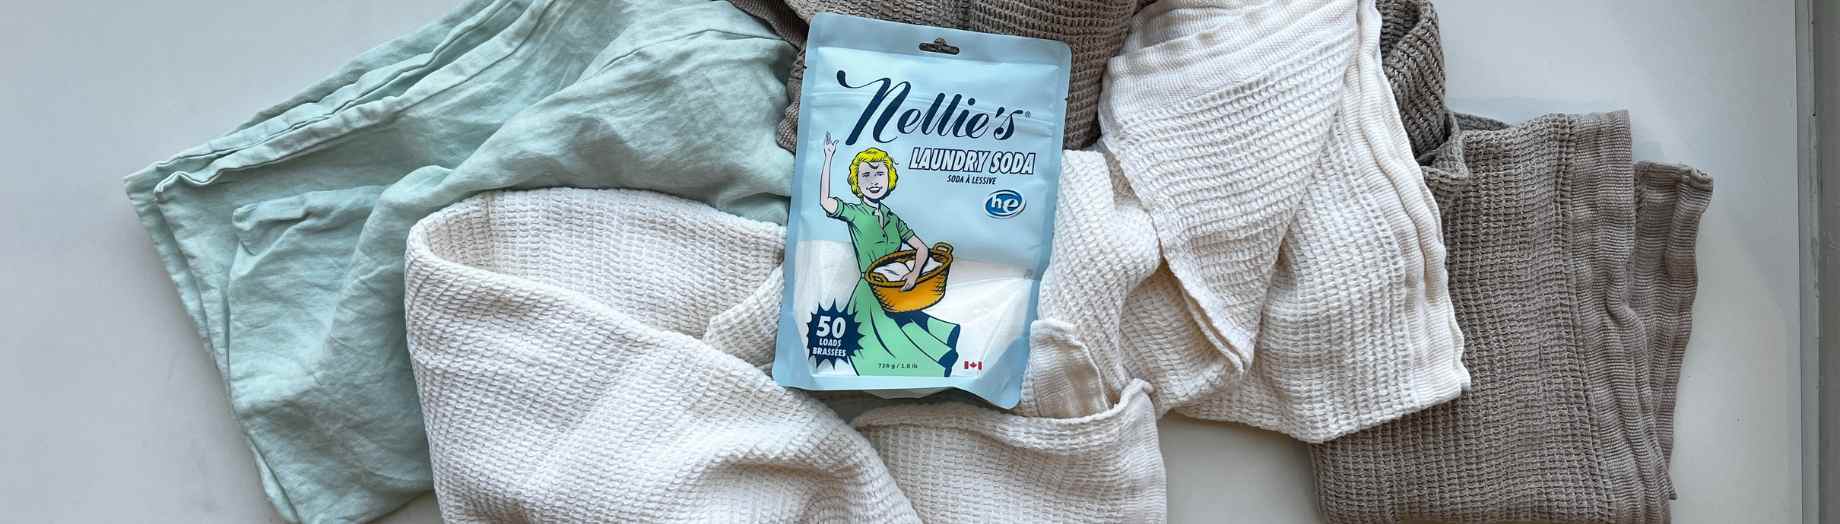 Nellie's Laundry Care